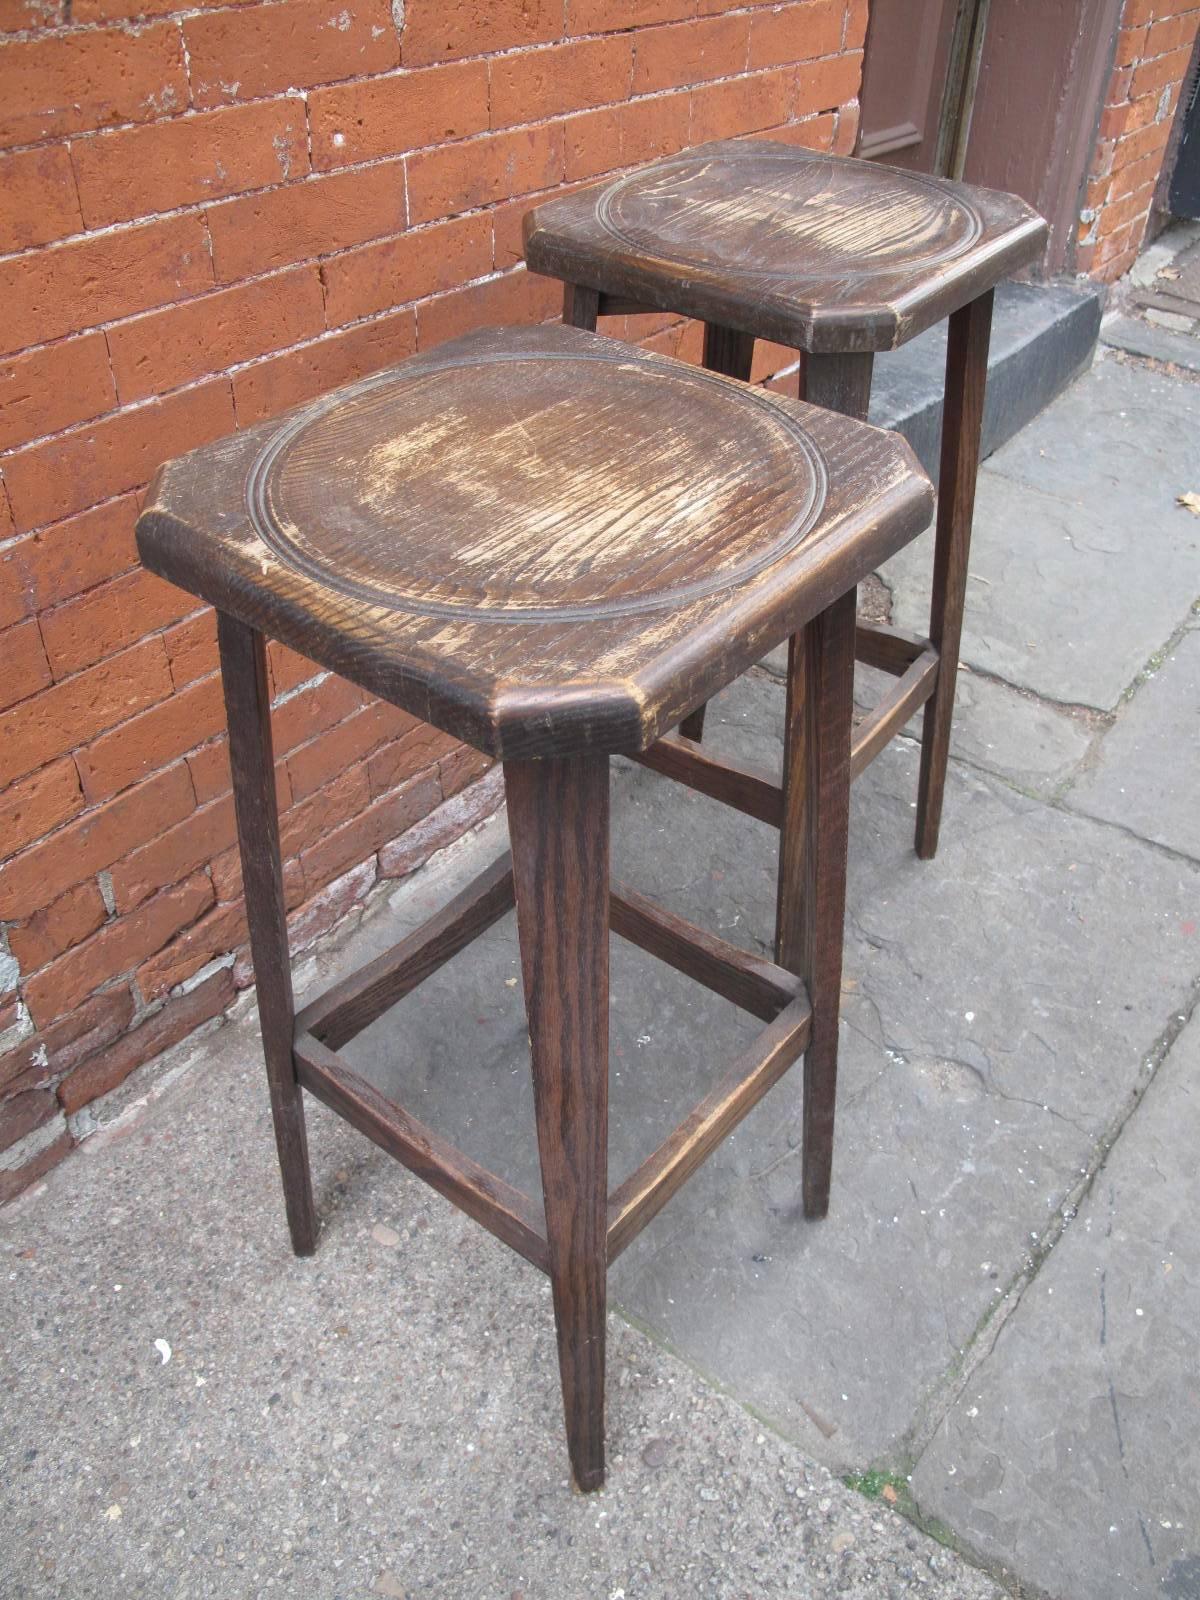 Oak tall stools with octagonal tops. Remnants of the label underneath as shown, illegible. Likely of American design and manufacture. Available as a pair.